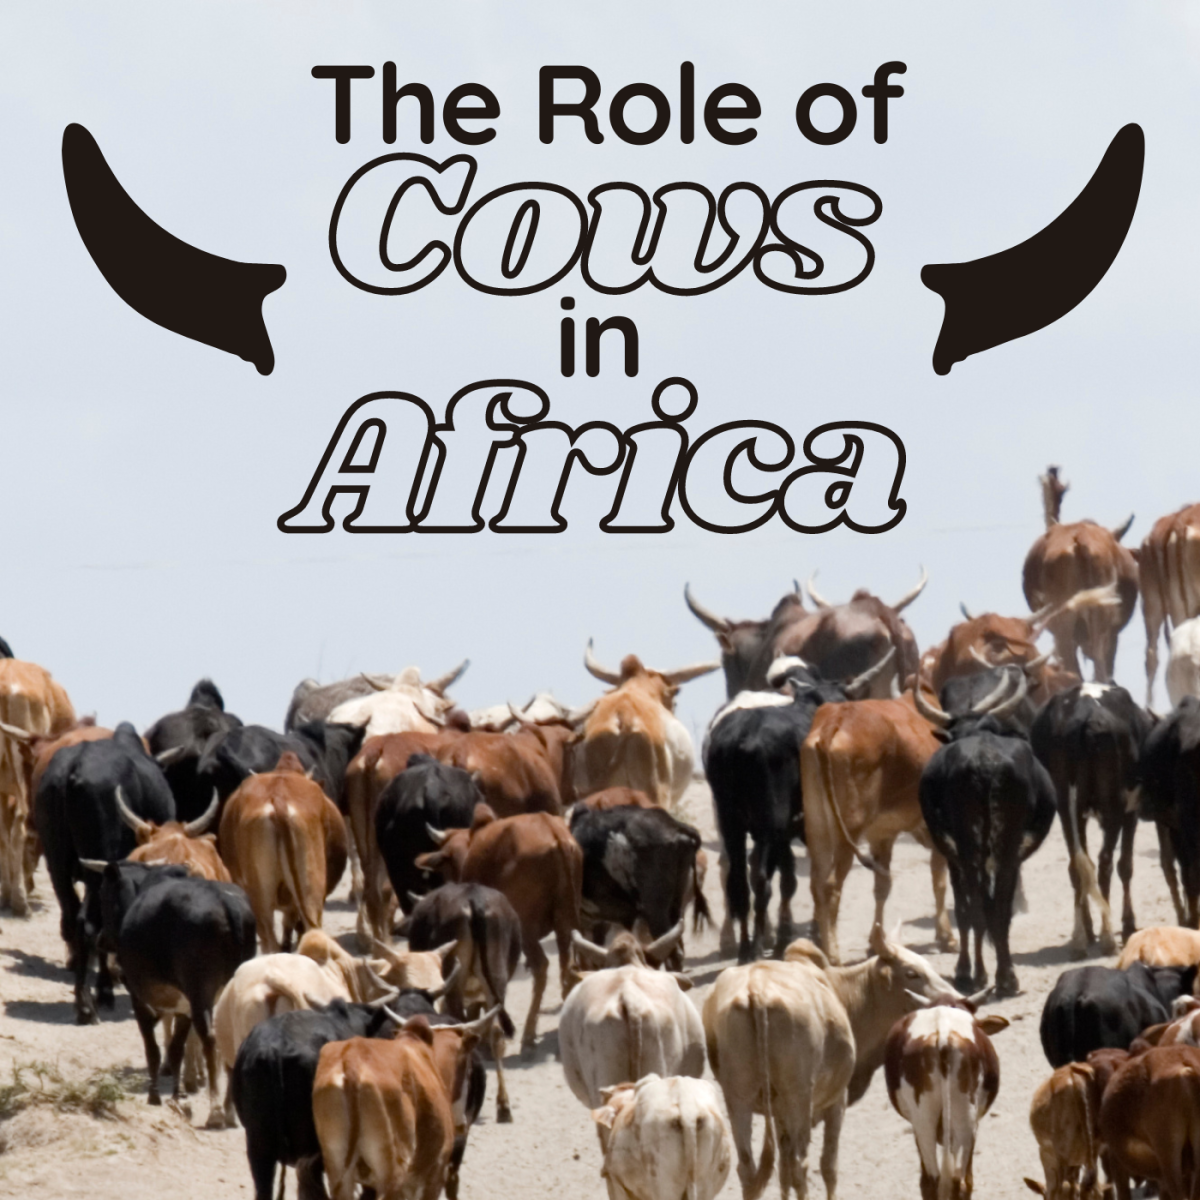 Traditional Uses of Cattle in Africa